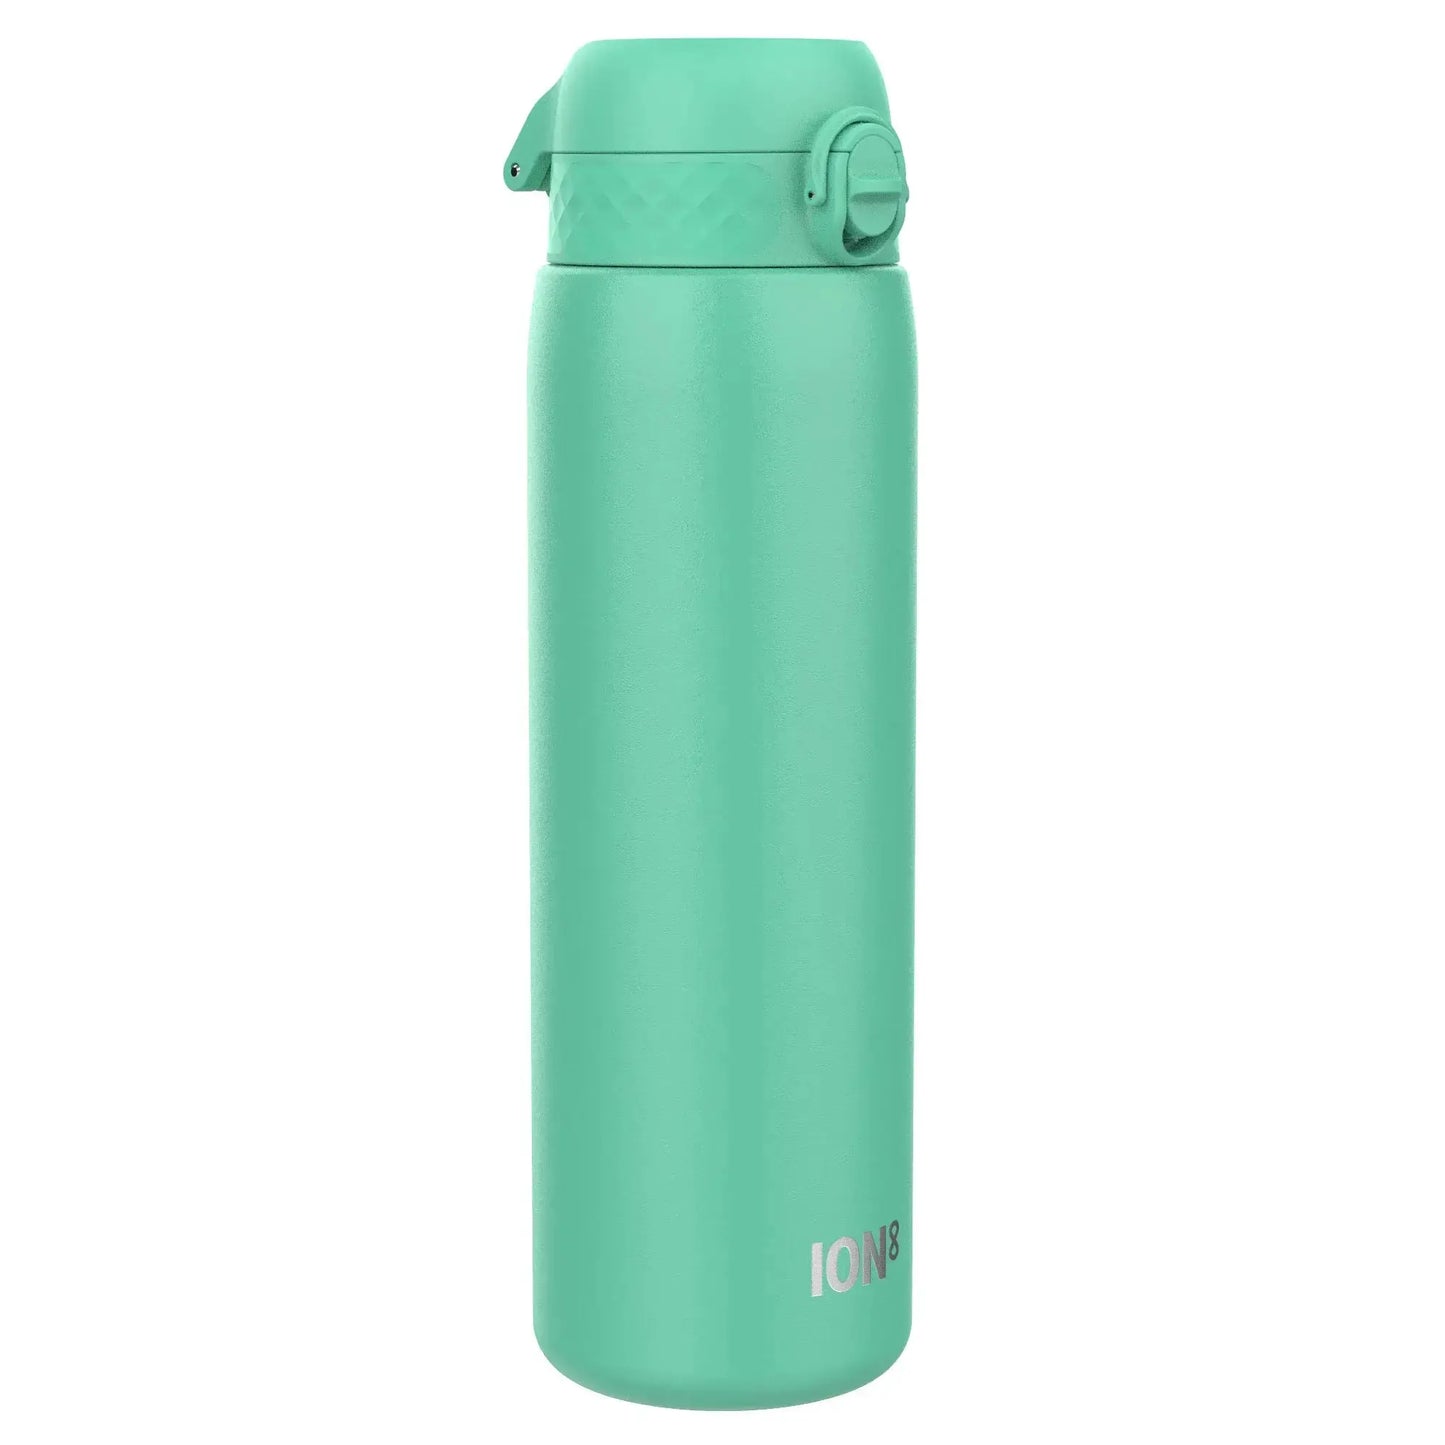 Leak Proof 1 Litre Thermal Water Bottle, Insulated Steel, Teal, 1L Ion8